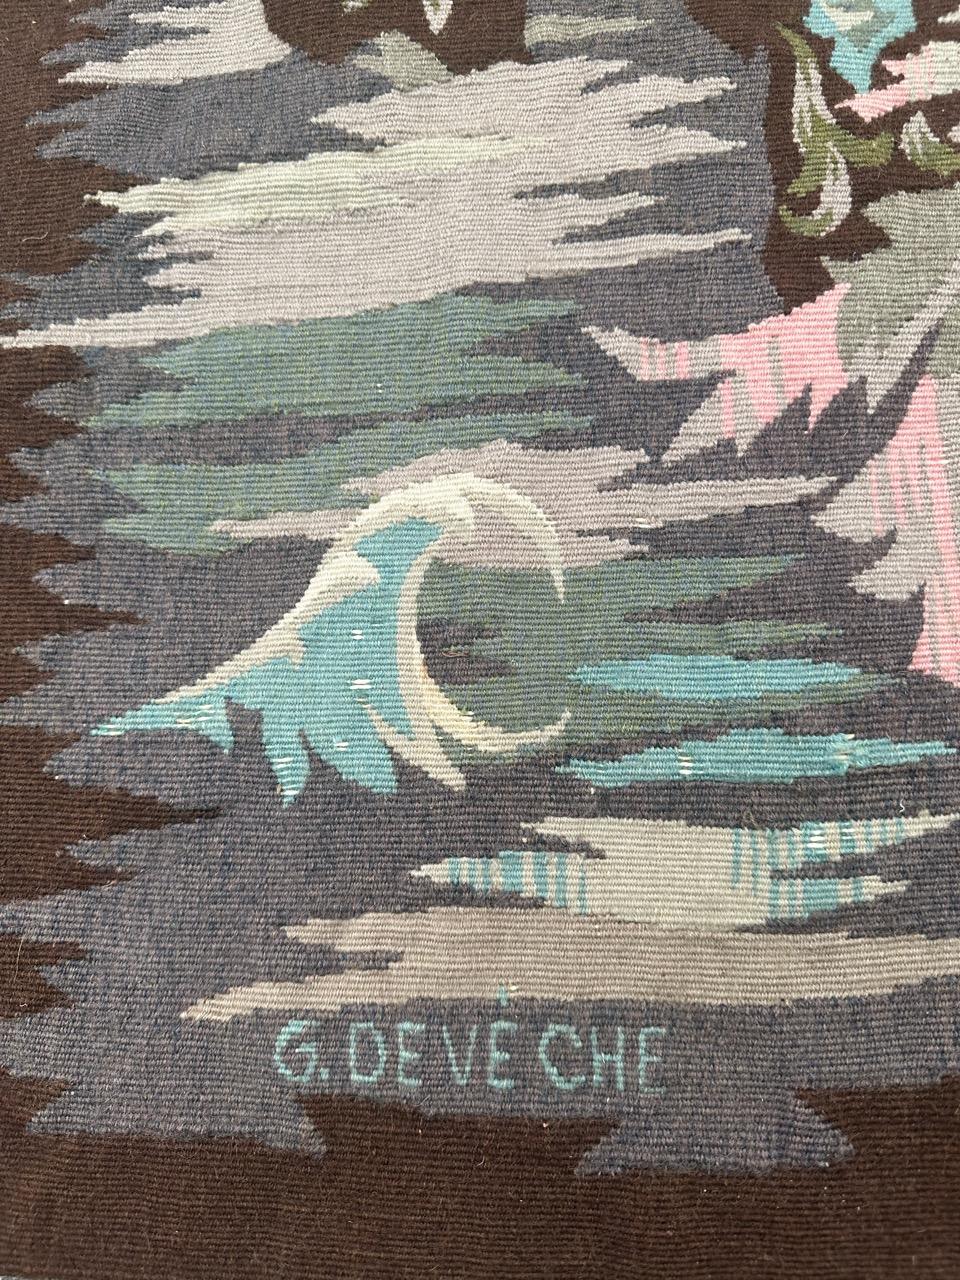 Very pretty mid century french Aubusson tapestry with beautiful design from the painter Georges Deveche ( 1903-1974), showing a scene with fish and underwater plants in stylized form. with brilliant colors. Entirely handwoven with wool on cotton